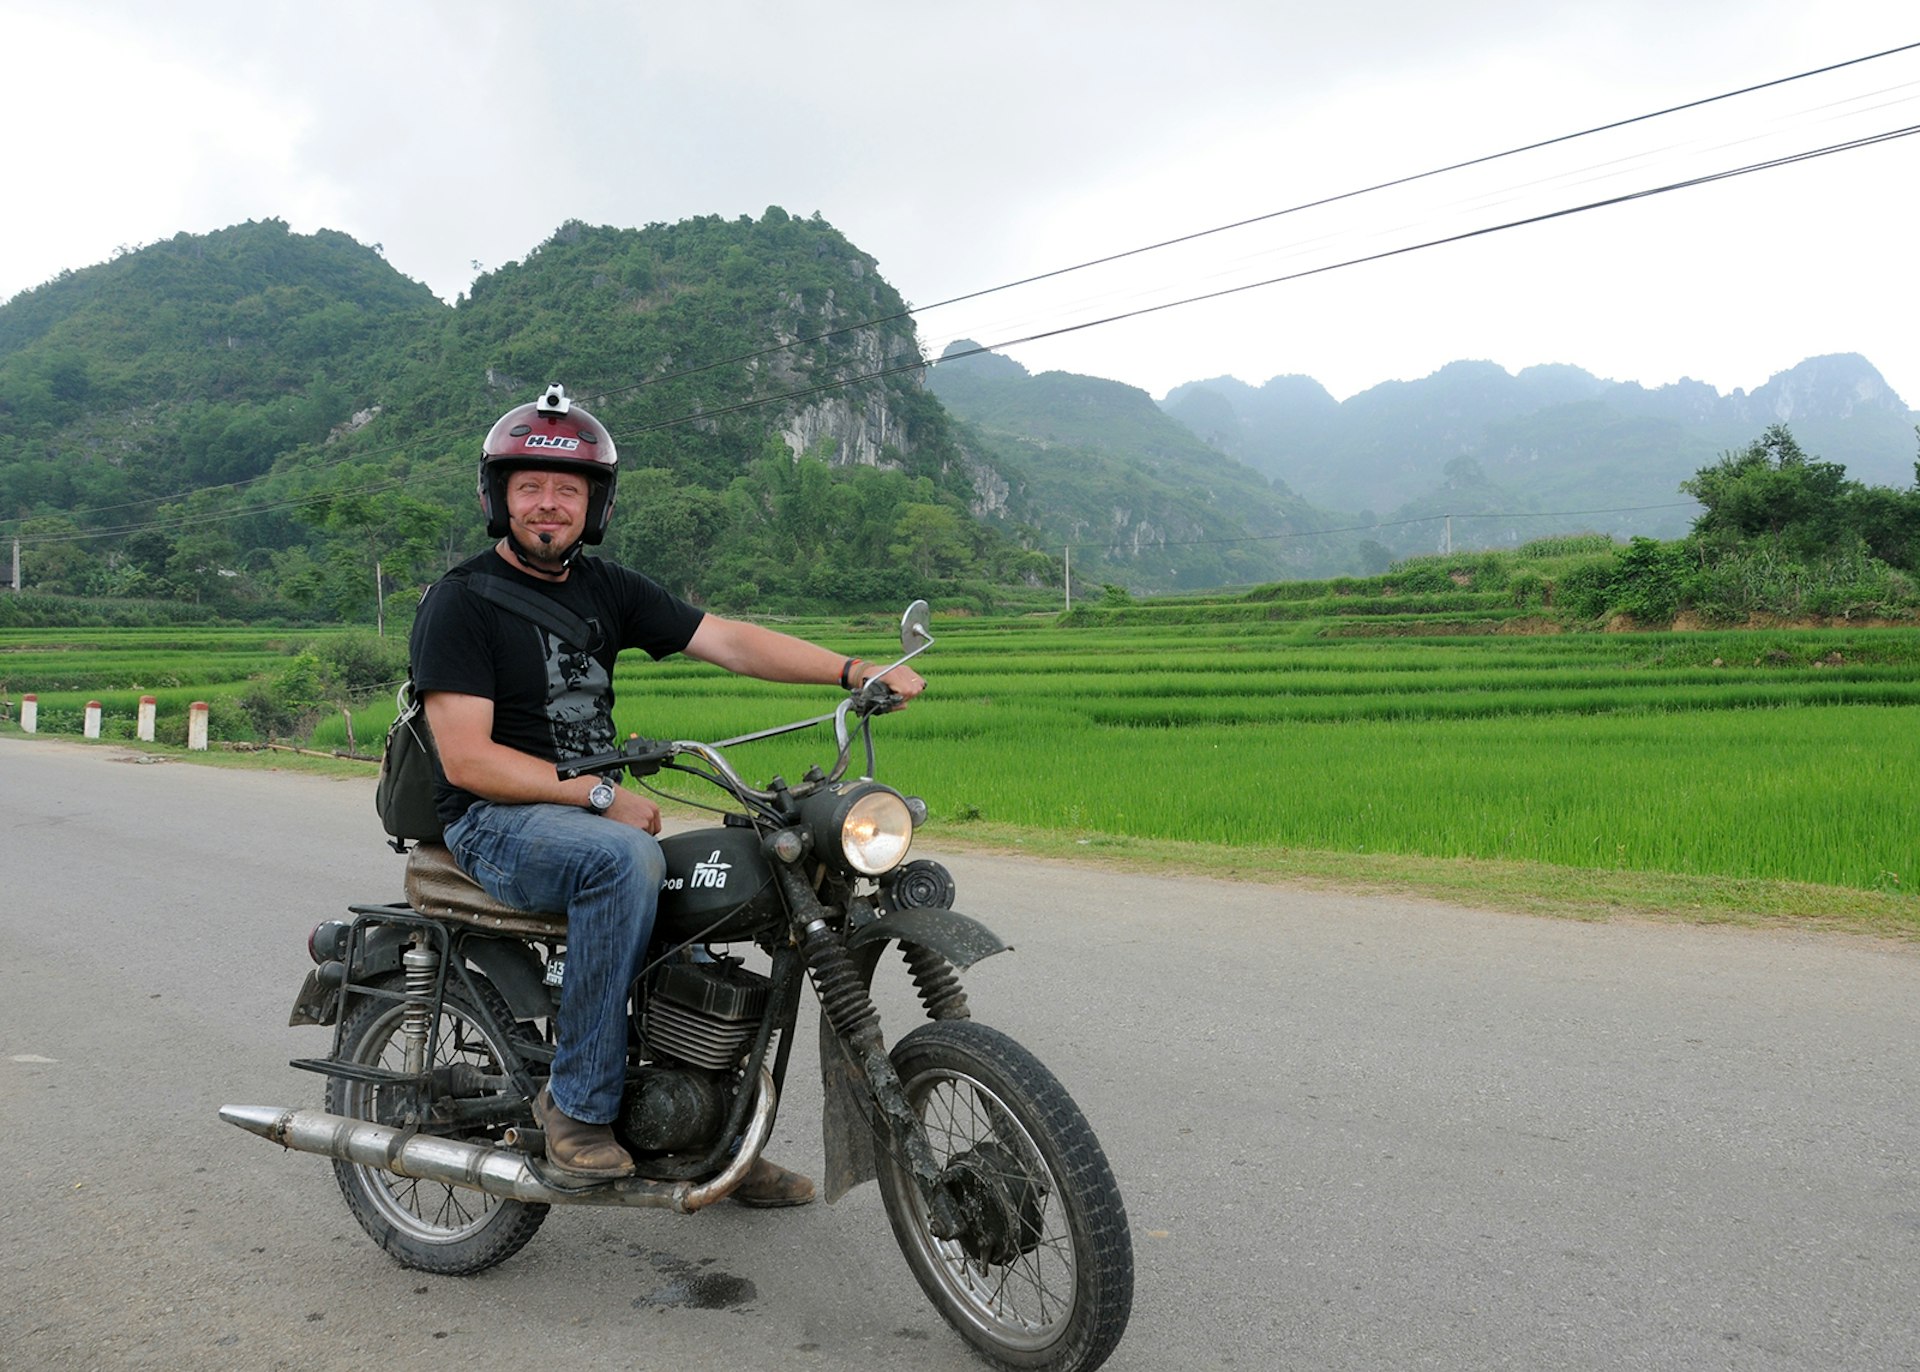 Charley Boorman riding a motorcycle in Vietnam © Charley Boorman